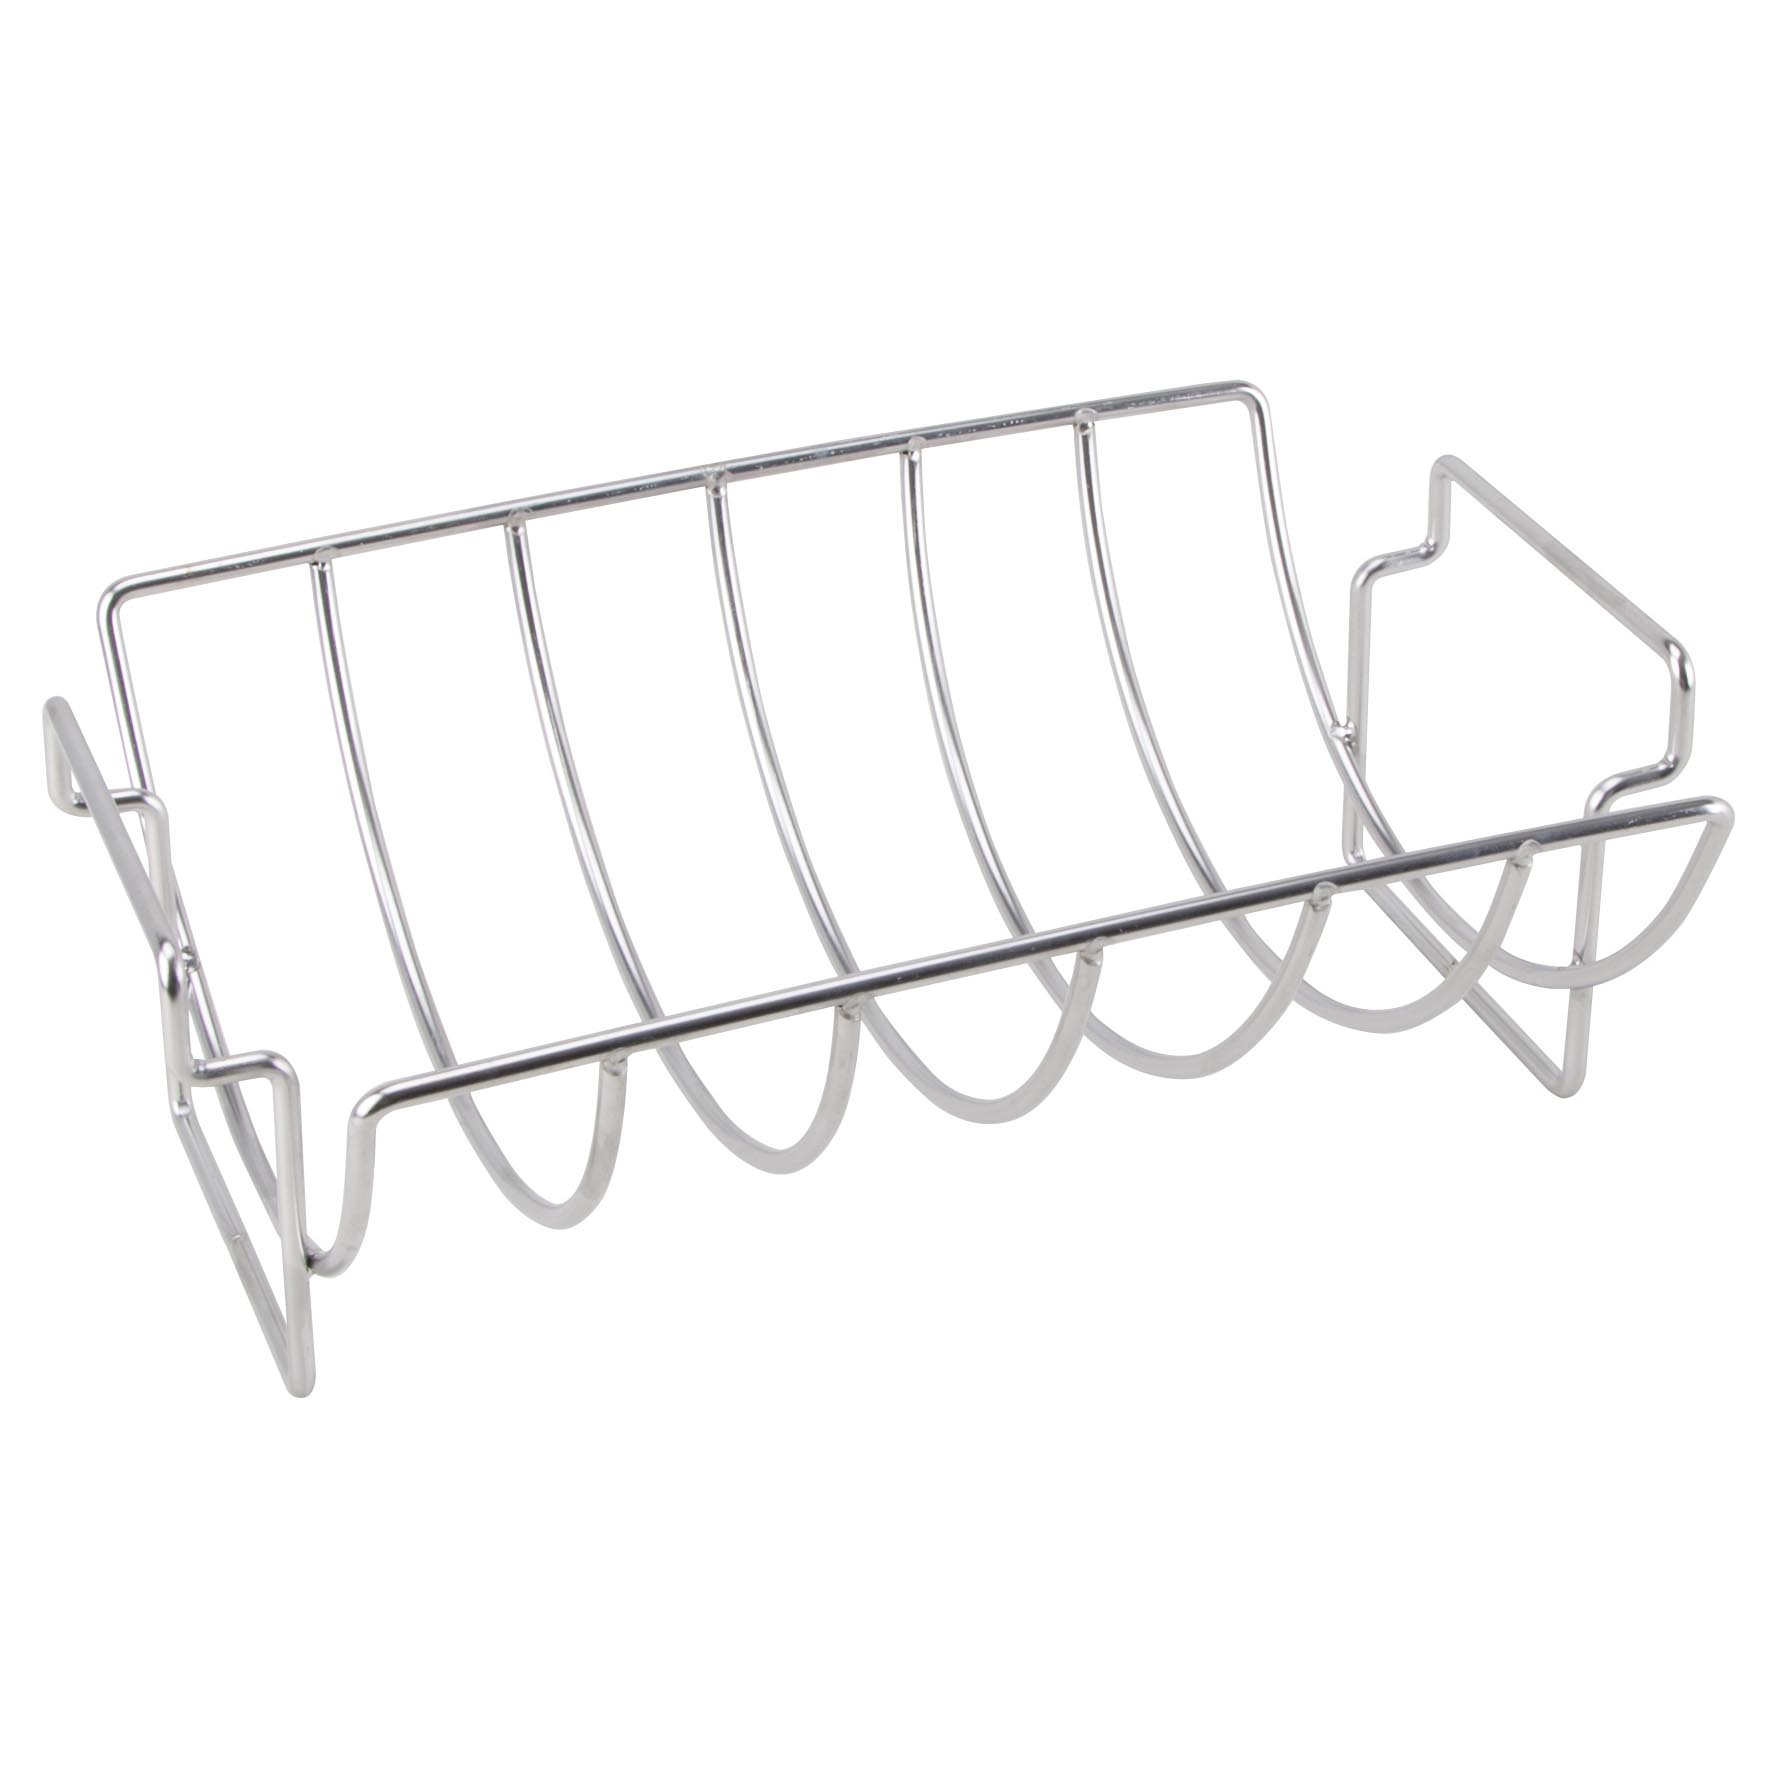 BBQ-37237 Rib and Roast Holder, 14-1/2 in L, Stainless Steel, Stainless Steel, Build-in Handle